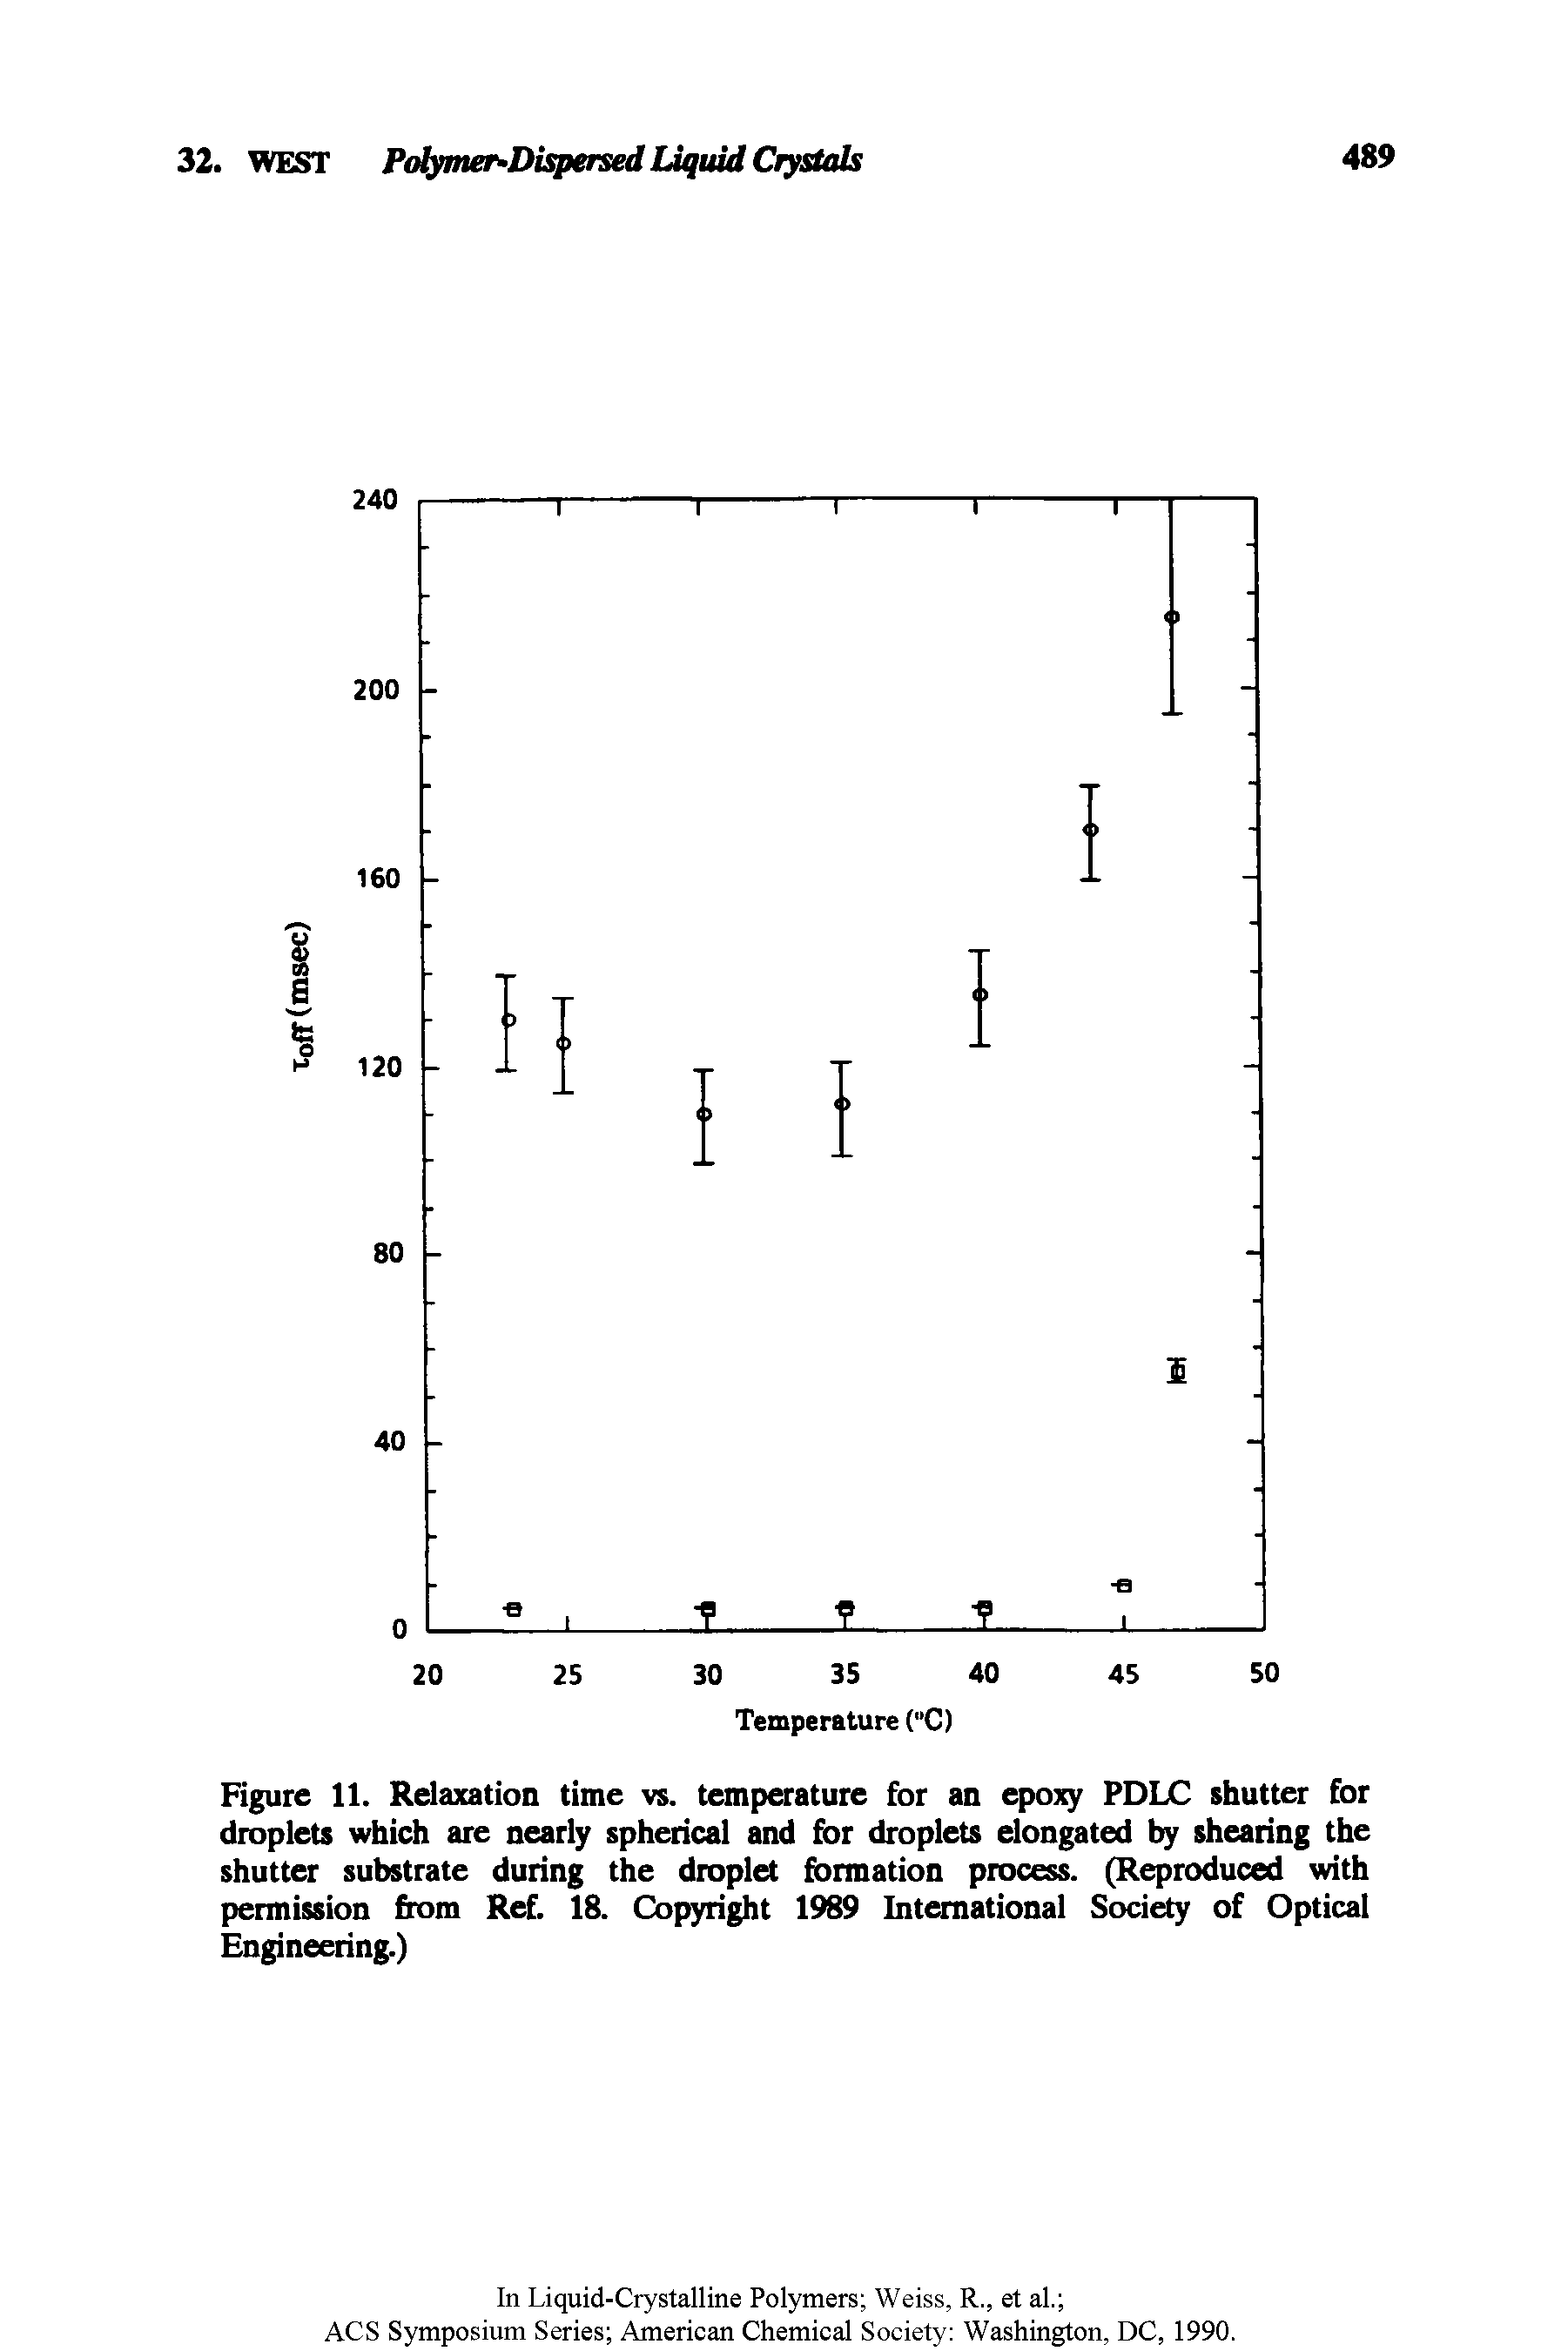 Figure 11. Relaxation time vs. temperature for an epoxy PDLC shutter for droplets which are nearly spherical and for droplets elongated by shearing the shutter substrate during the droplet formation process. (Reproduced with permission from Ref. 18. Copyright 1989 International Society of Optical Engineering.)...